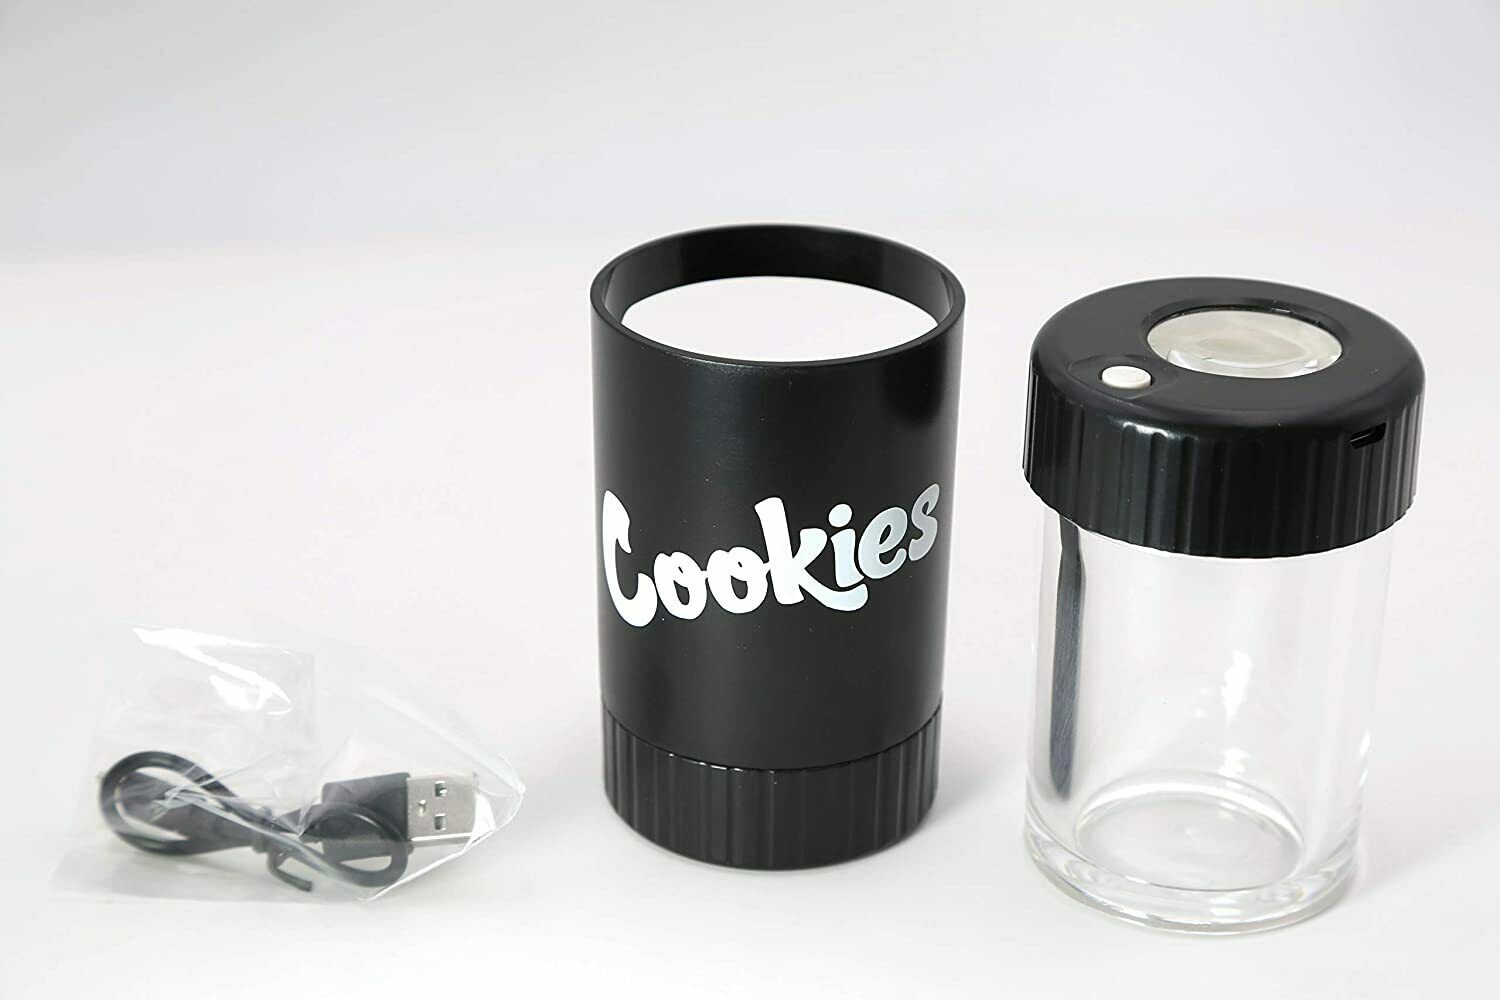 Child resistant container / grinder printed